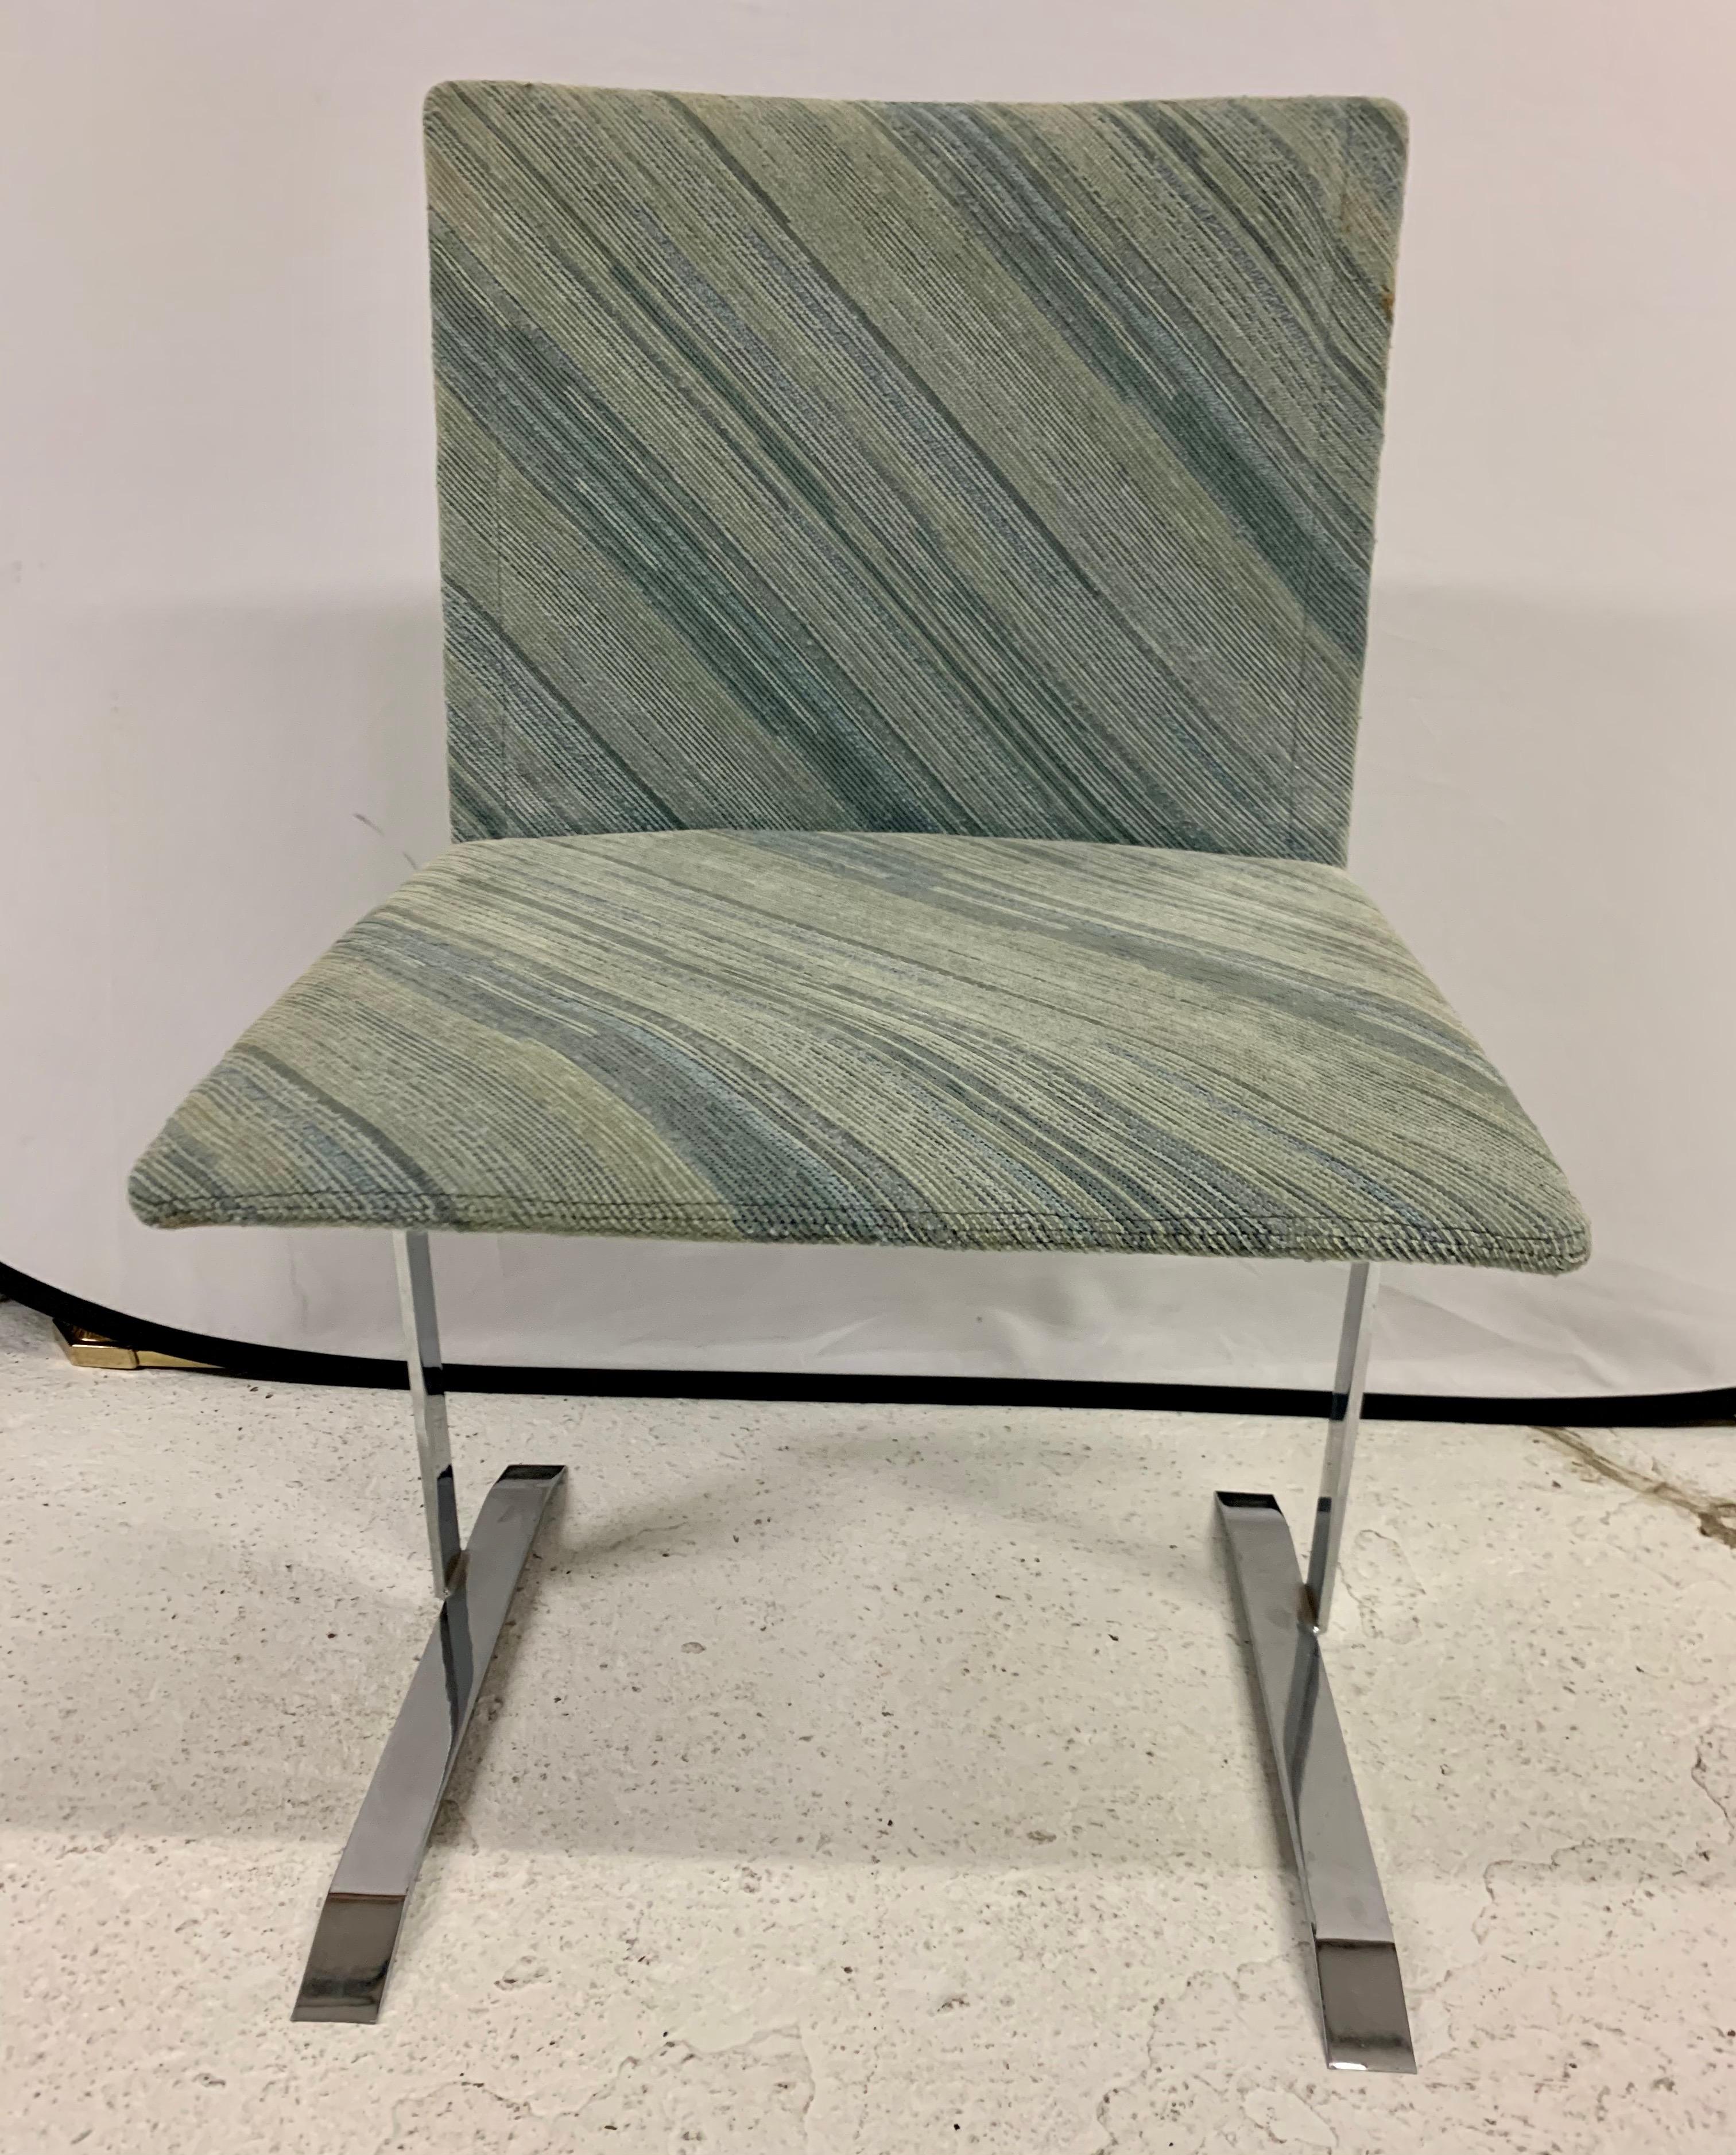 Rare Saporiti set of dining chairs with steel legs and lines to die for. These dining chairs were made in Italy and feature a seafoam, green and blue color scheme on the seat fabric. Designed by Giovanni Offredi, Circa 1970's.